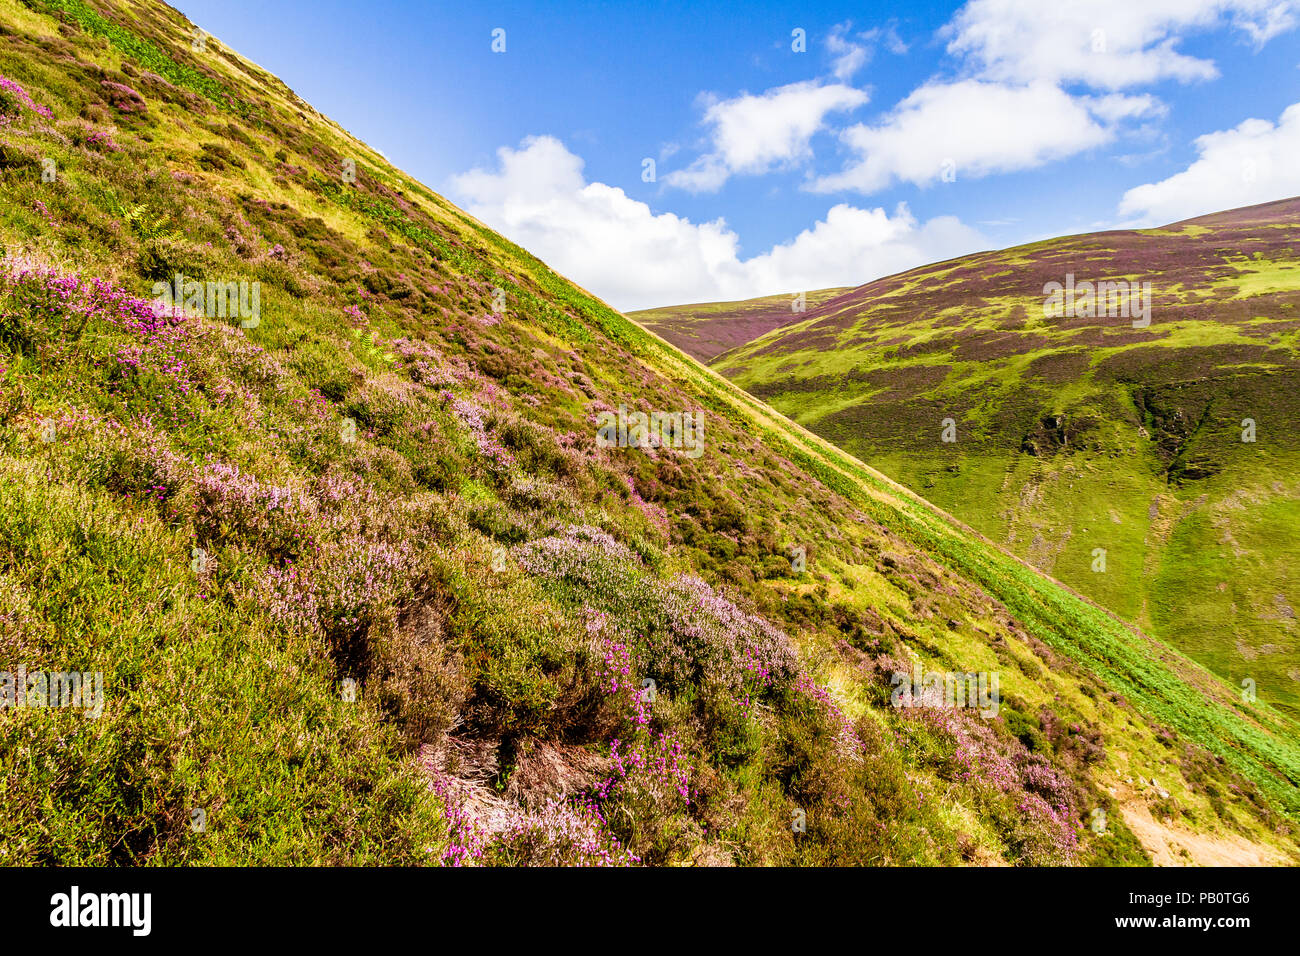 Heather growing on the steep slopes leading up to Loch Skeen from Grey Mare's Tail waterfall, Dumfries & Galloway, Scotland, UK. Stock Photo